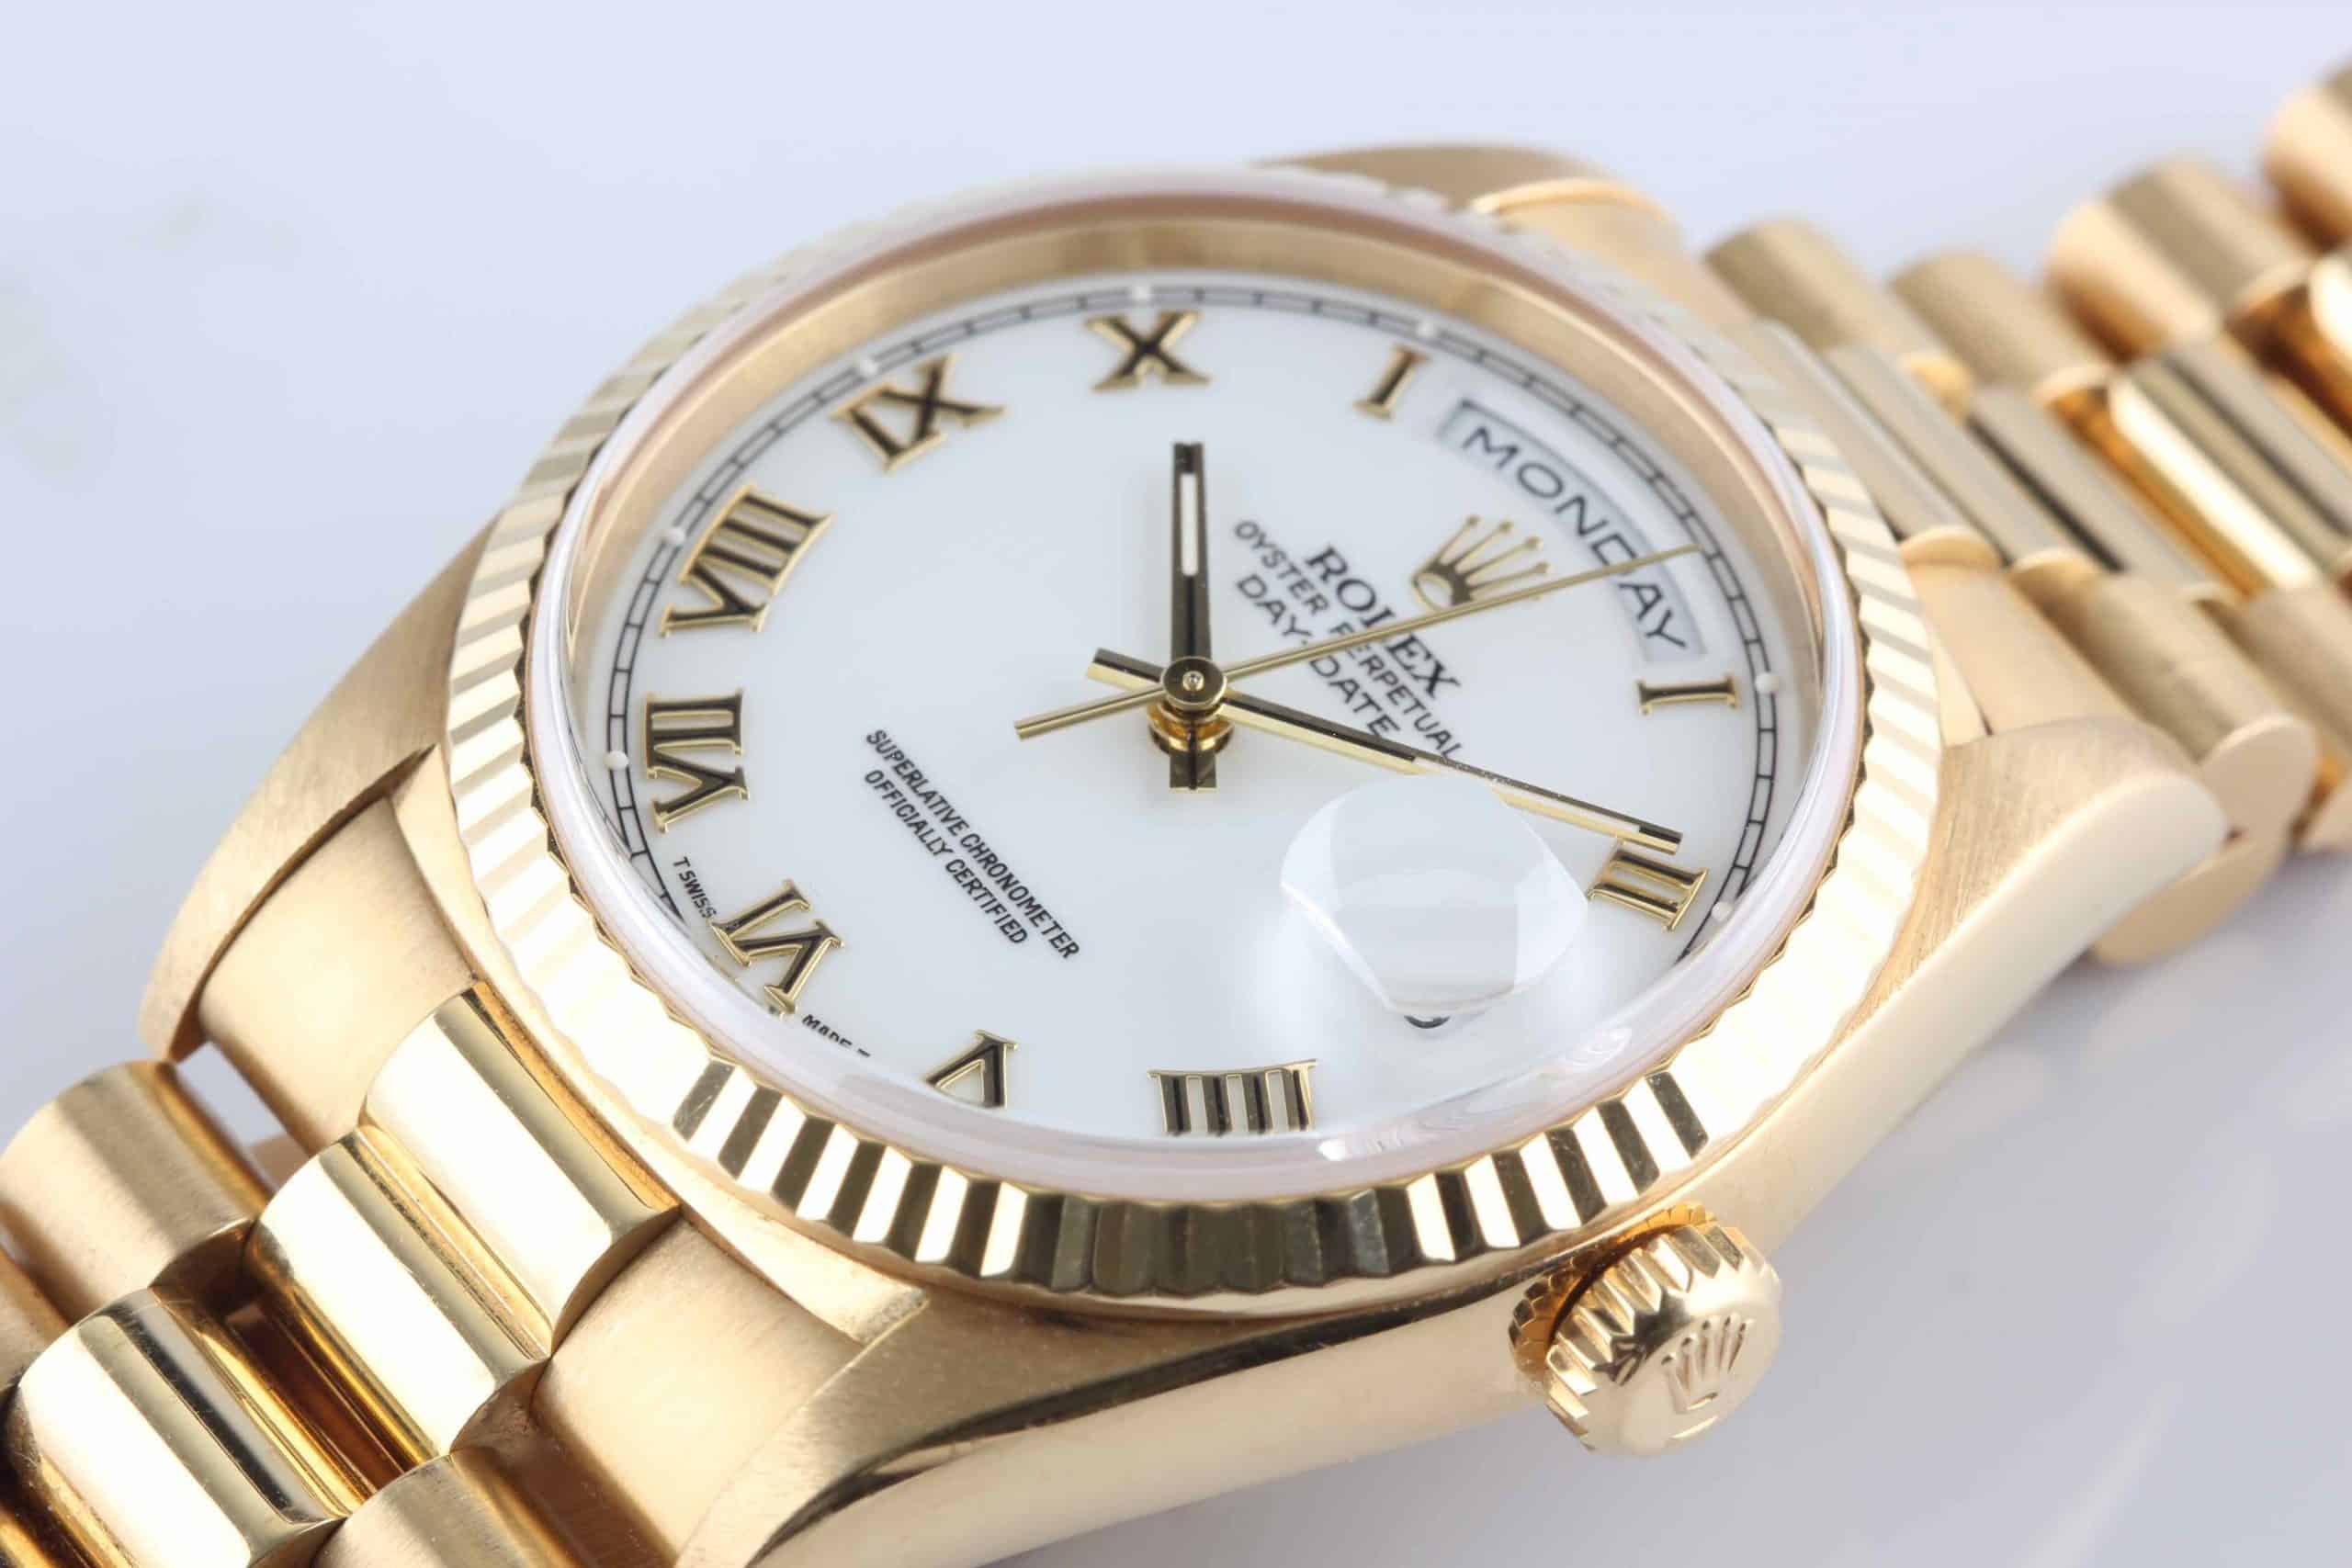 Rolex 18K Day Date President - Reference 18238 - SOLD - Watch Seller